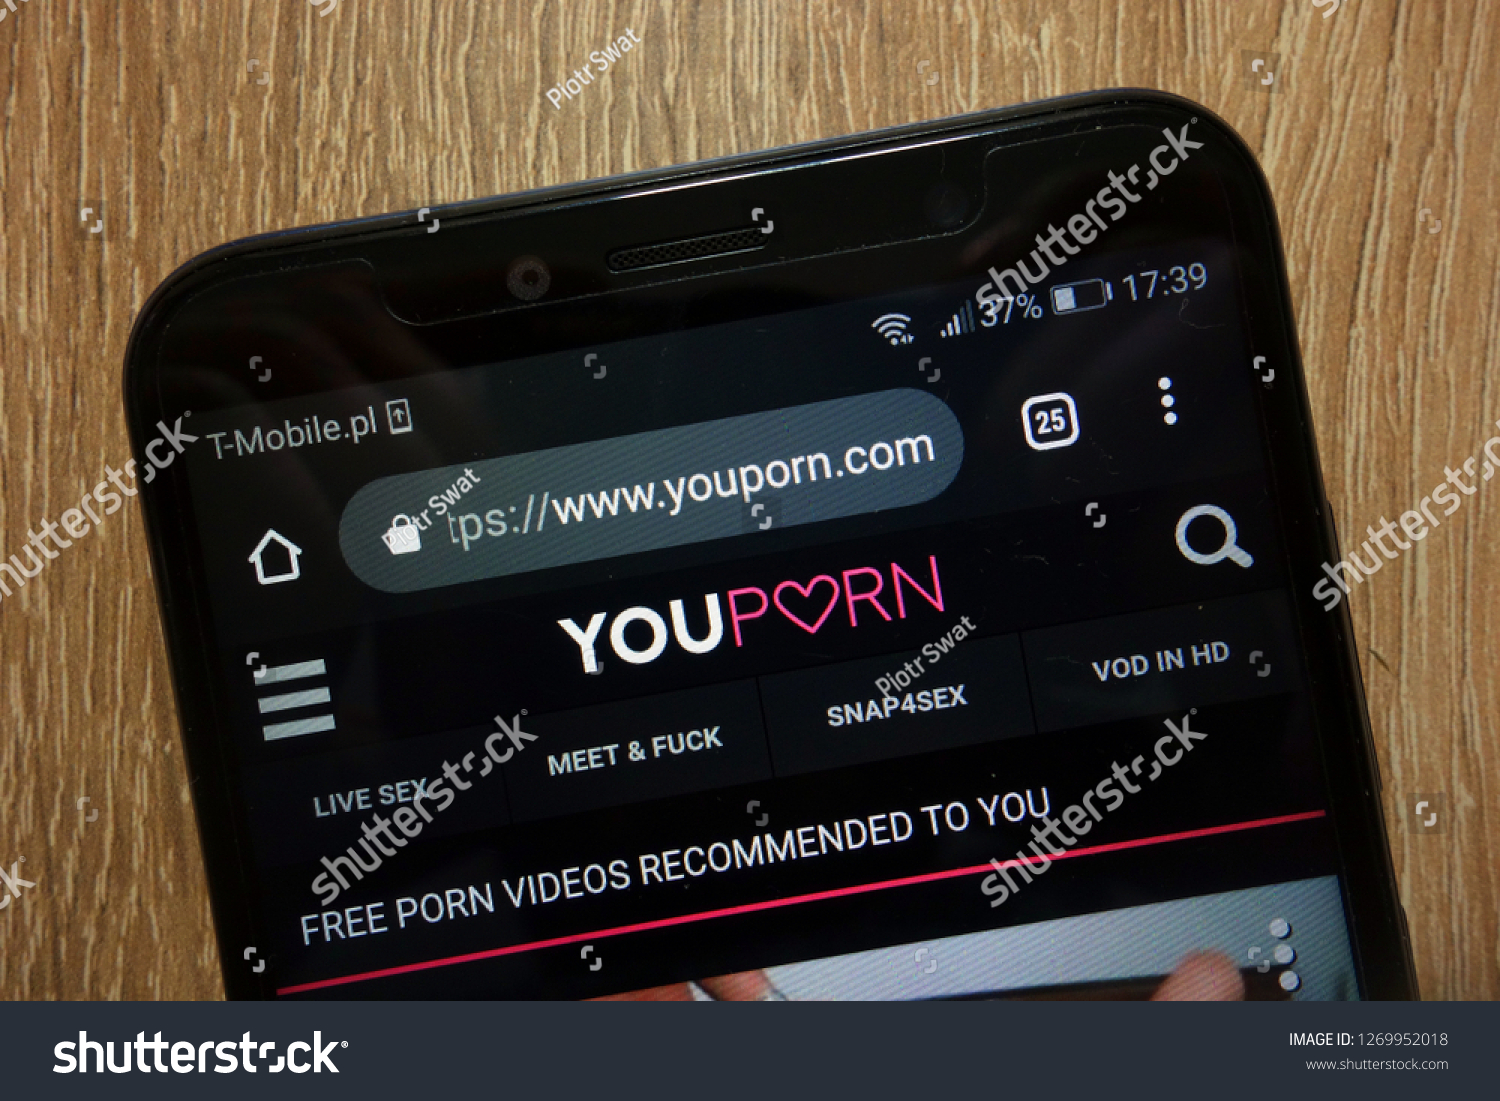 Youporn Free Porn